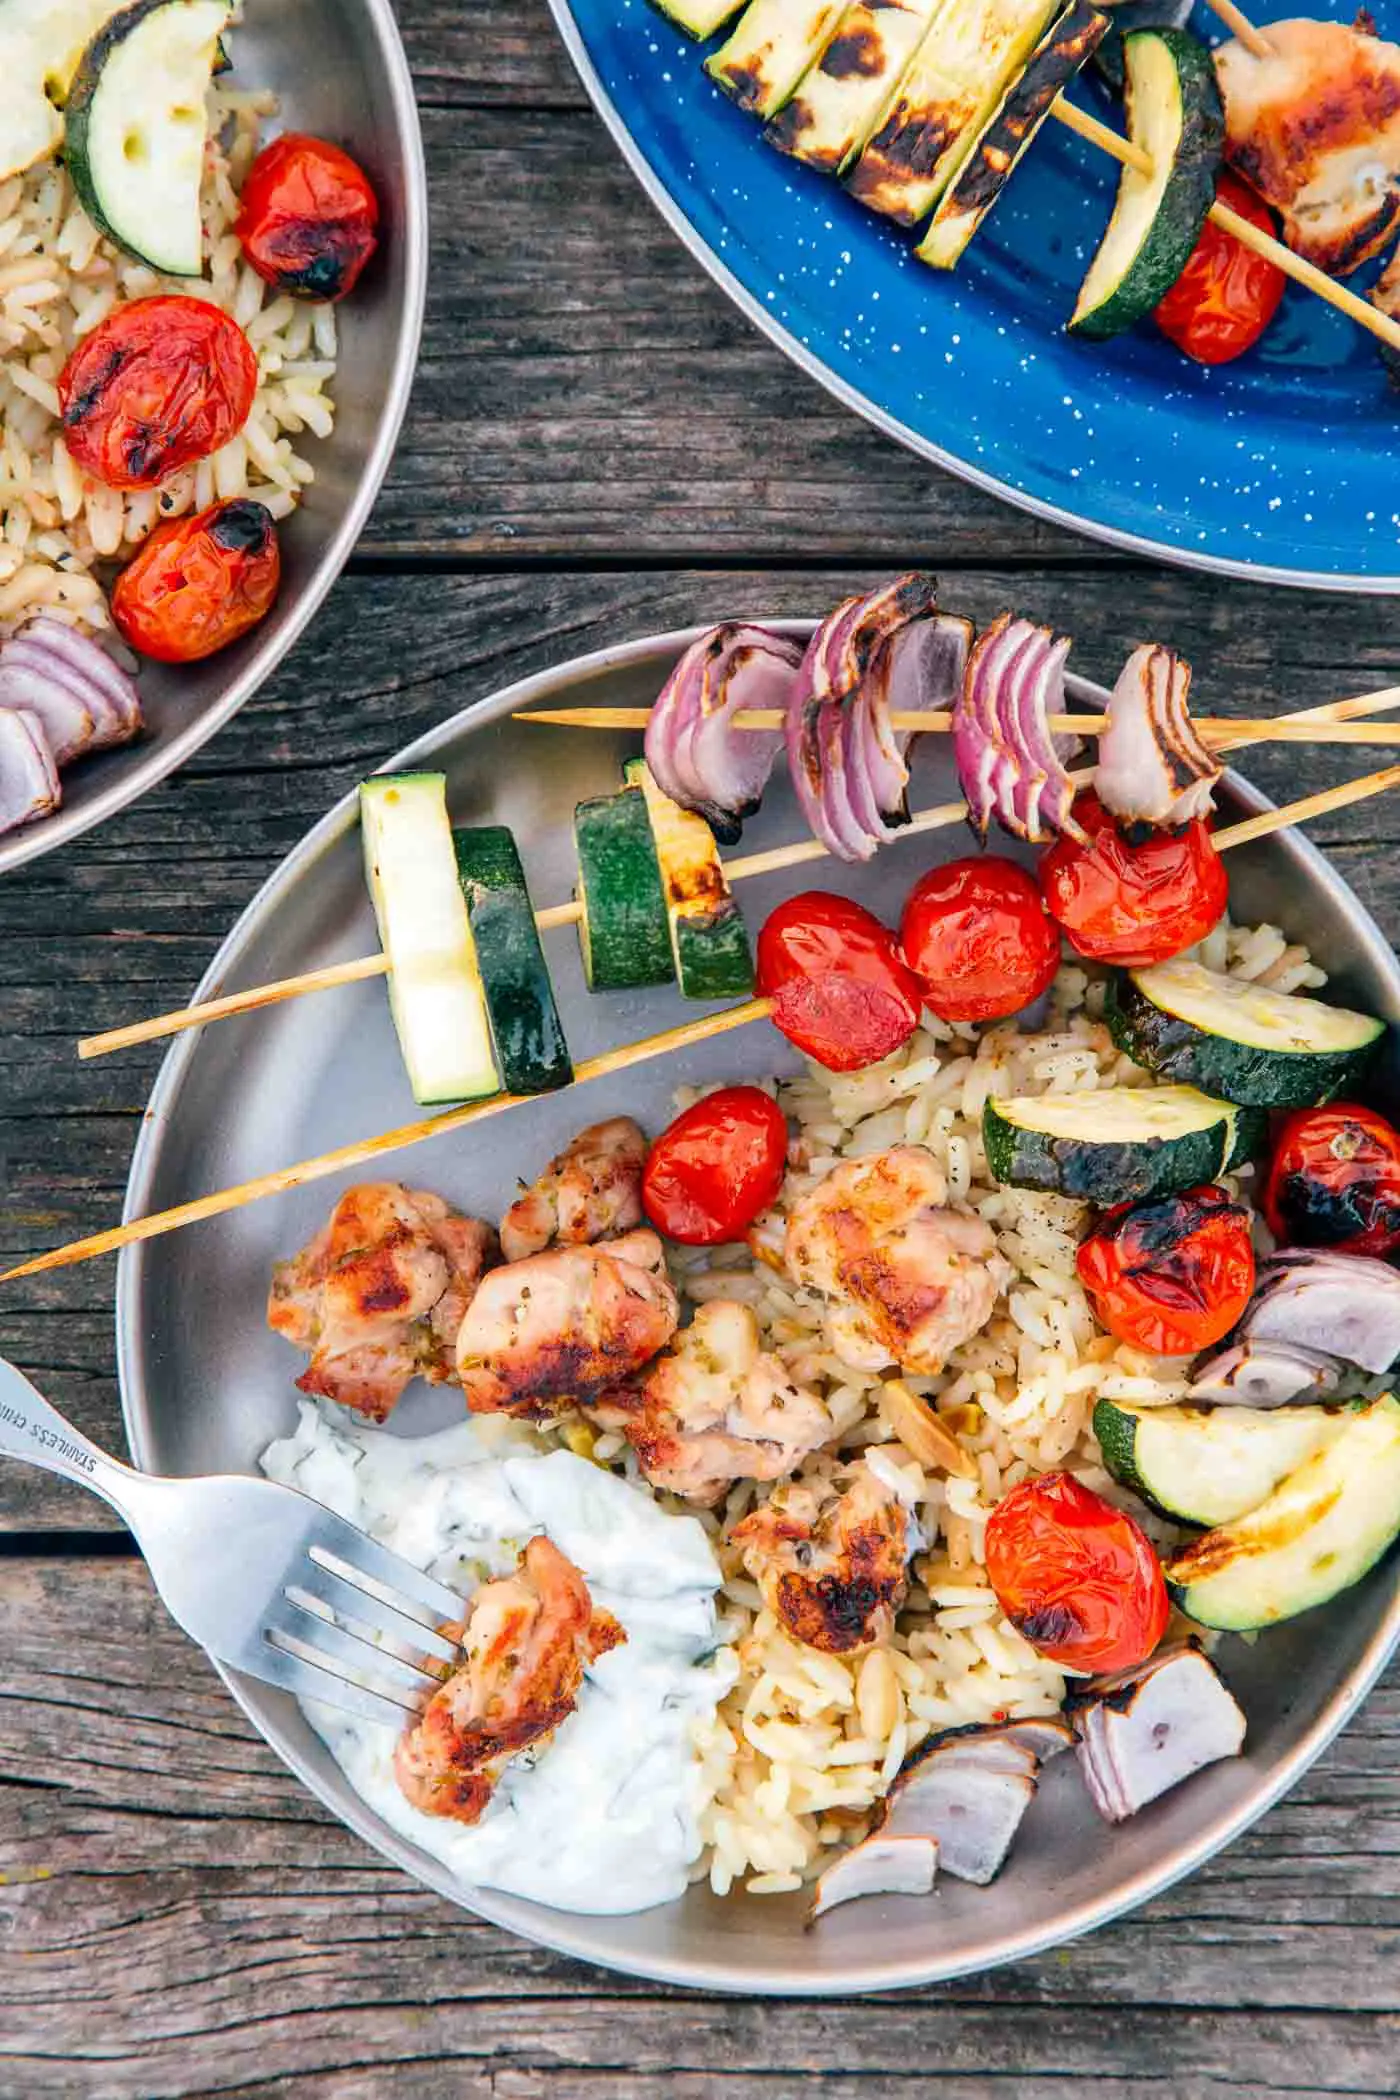 Grilled chicken and vegetable skewers with tzatziki sauce on a plate